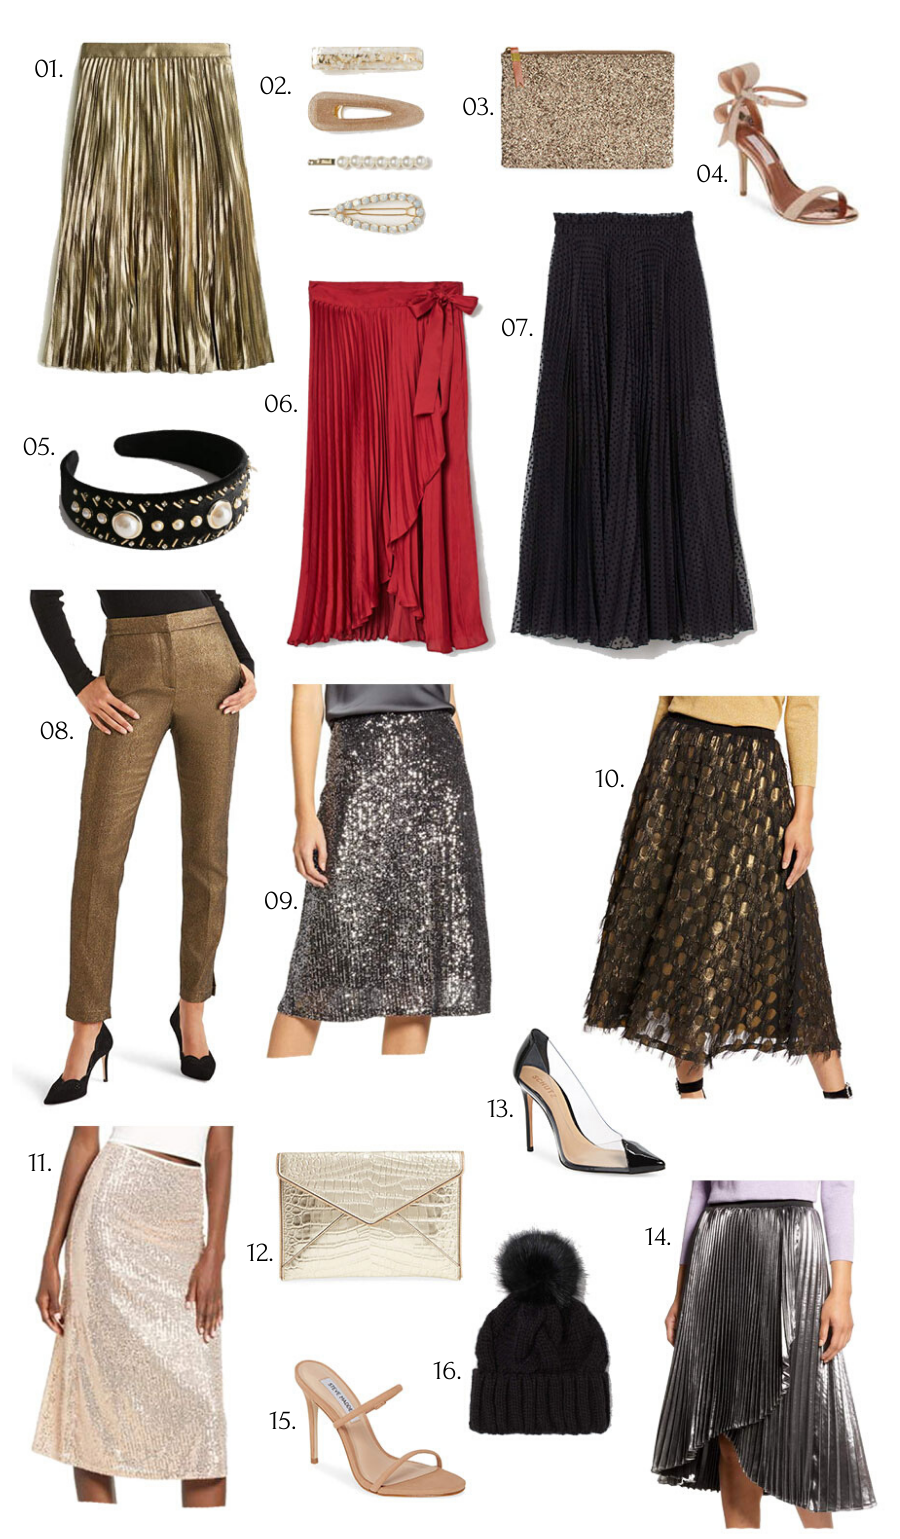 Holiday Skirts and Accessories